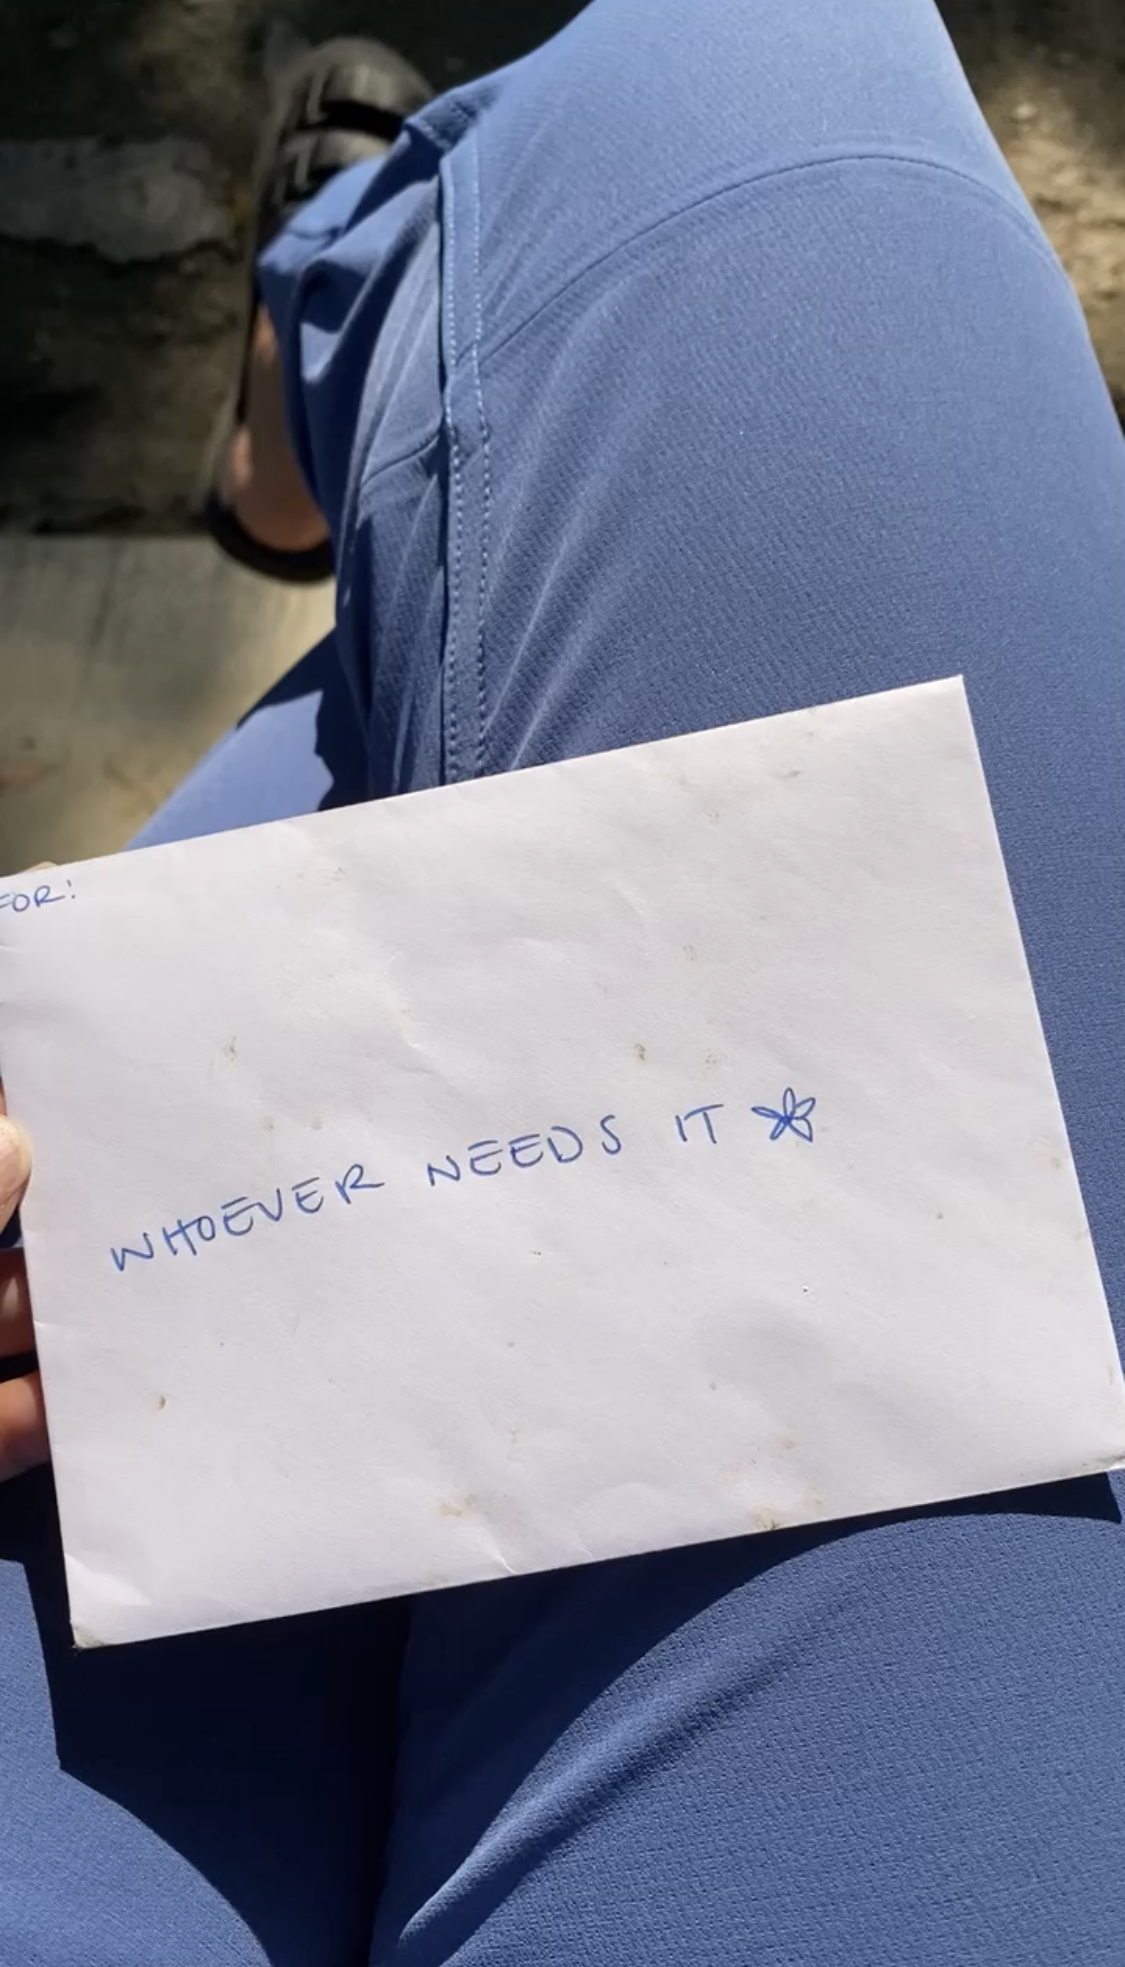 Envelope that reads "Whoever Needs It"